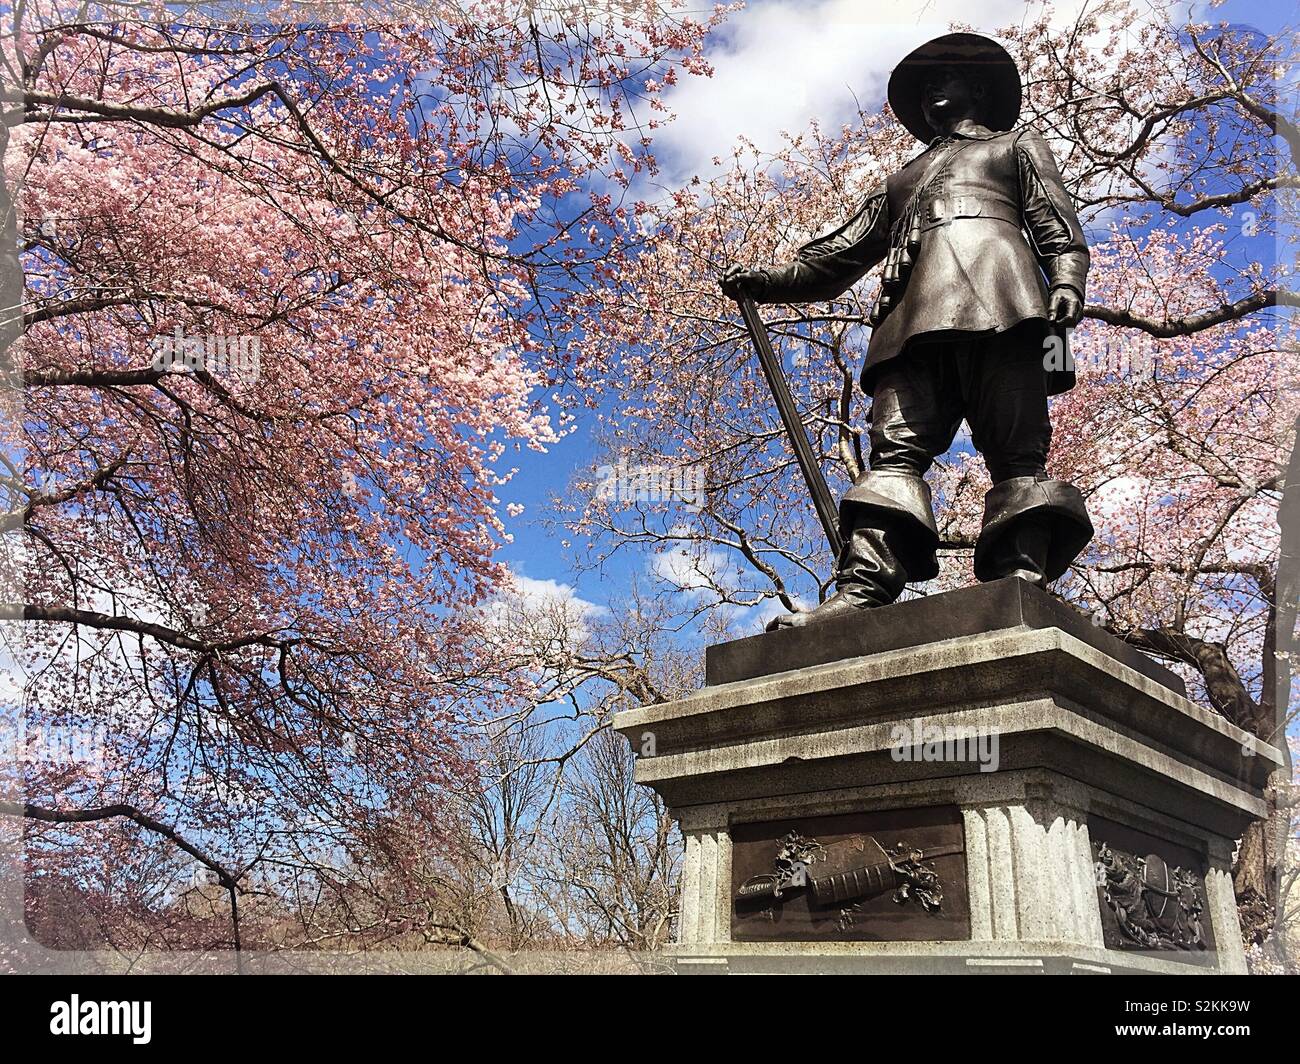 The pilgrims statue on Pilgrim hill in the spring time, Central Park, NYC, USA Stock Photo